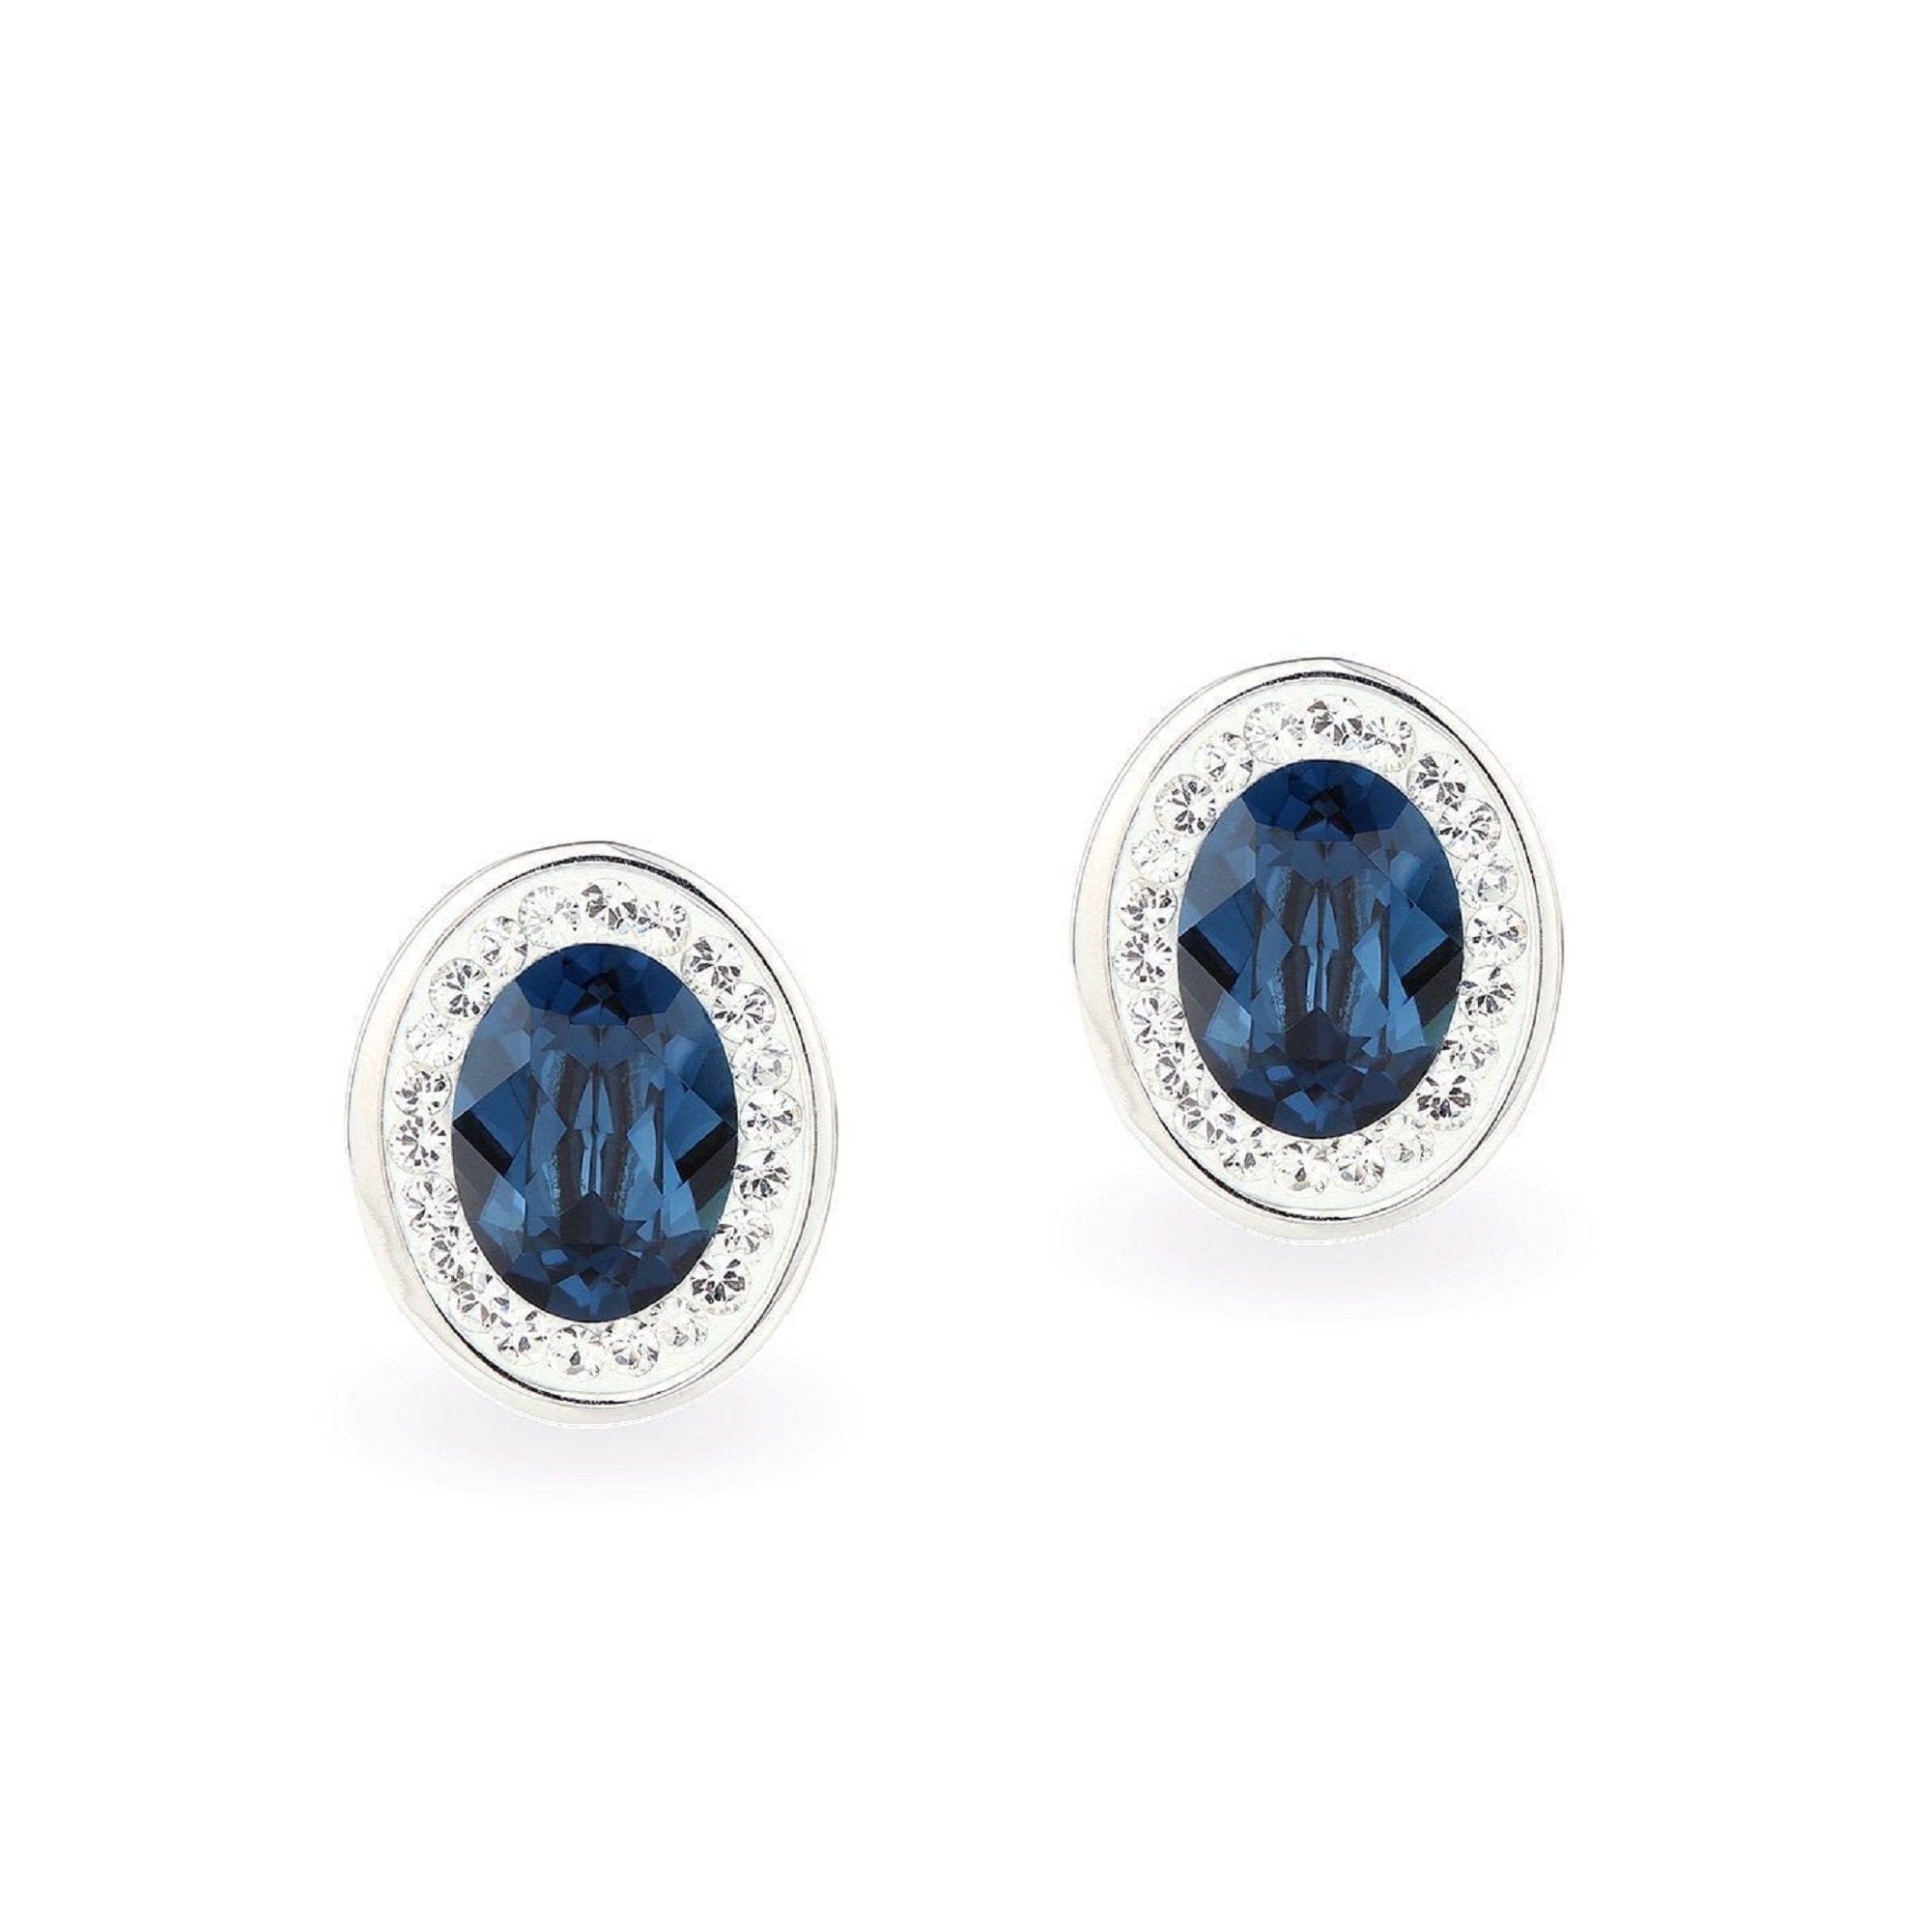 Mini Round Crystal Post Stud Earrings - Fame Accessories